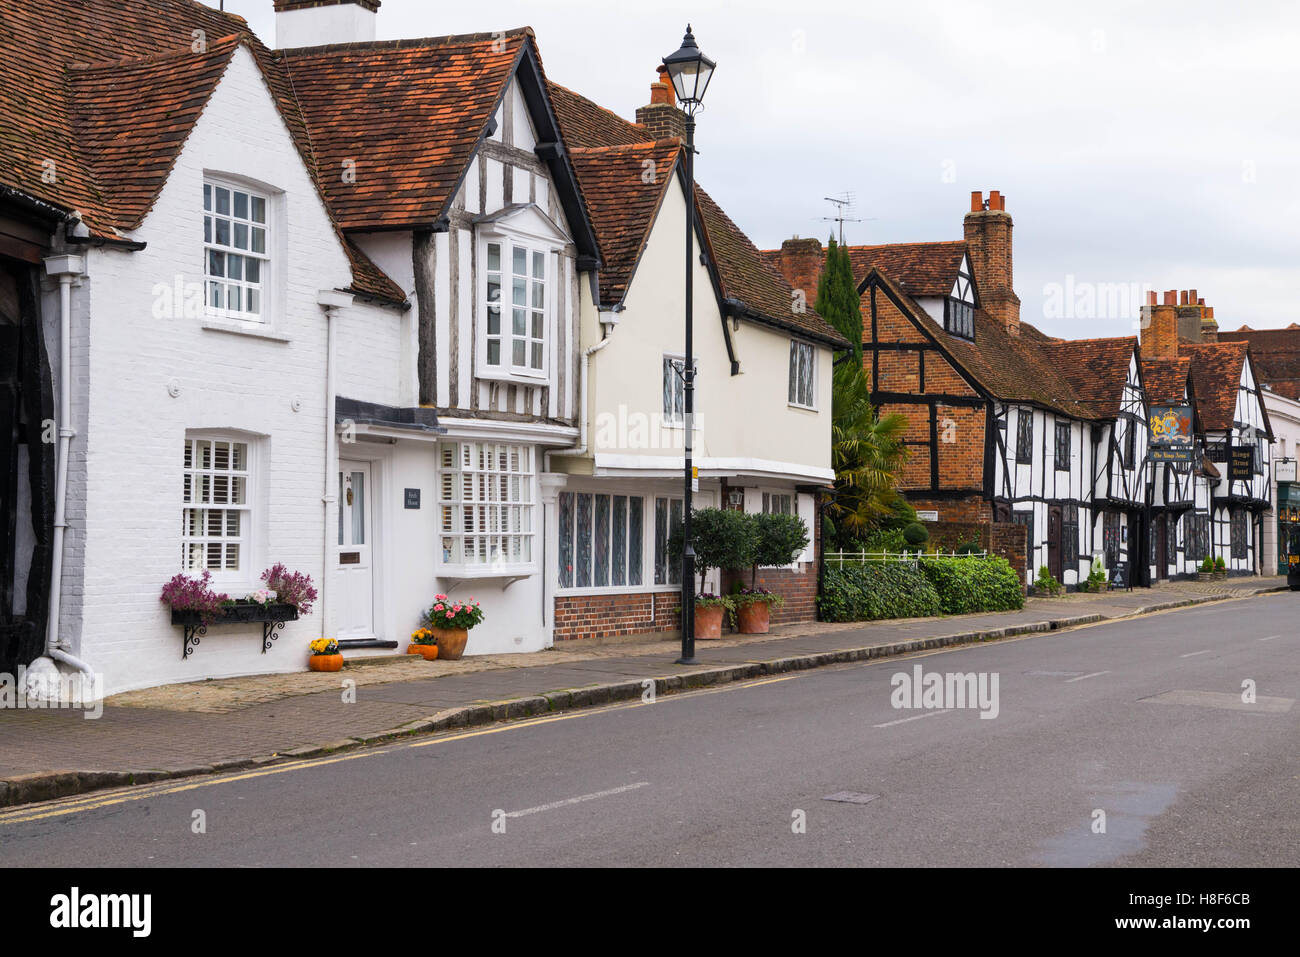 View of the High Street in Old Amersham, Buckinghamshire, England. November 2016 Stock Photo